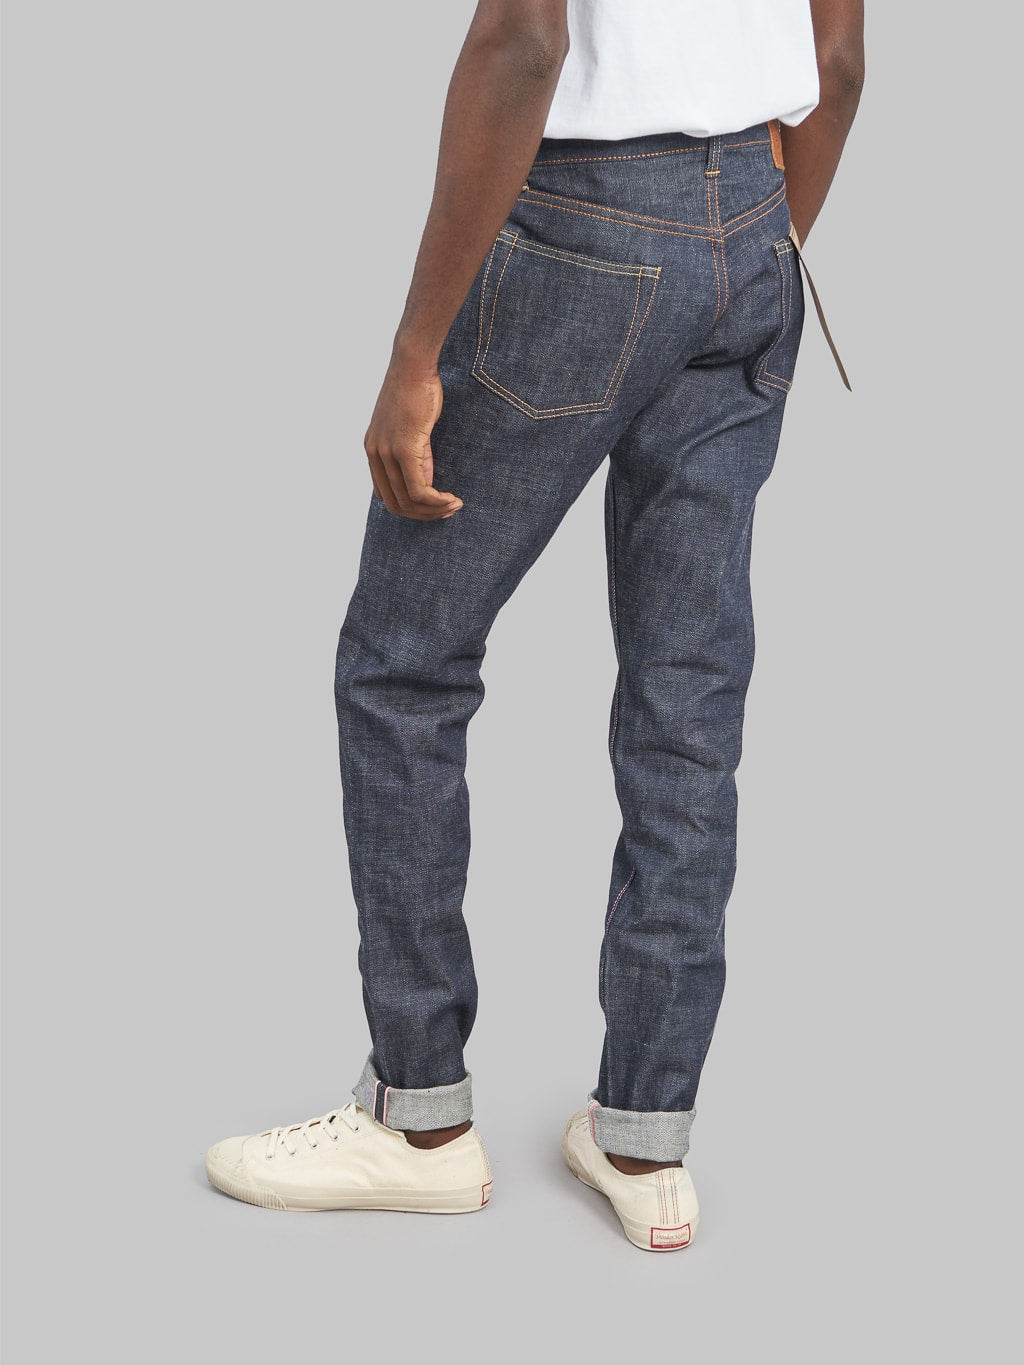 Momotaro legacy blue high tapered jeans back fit